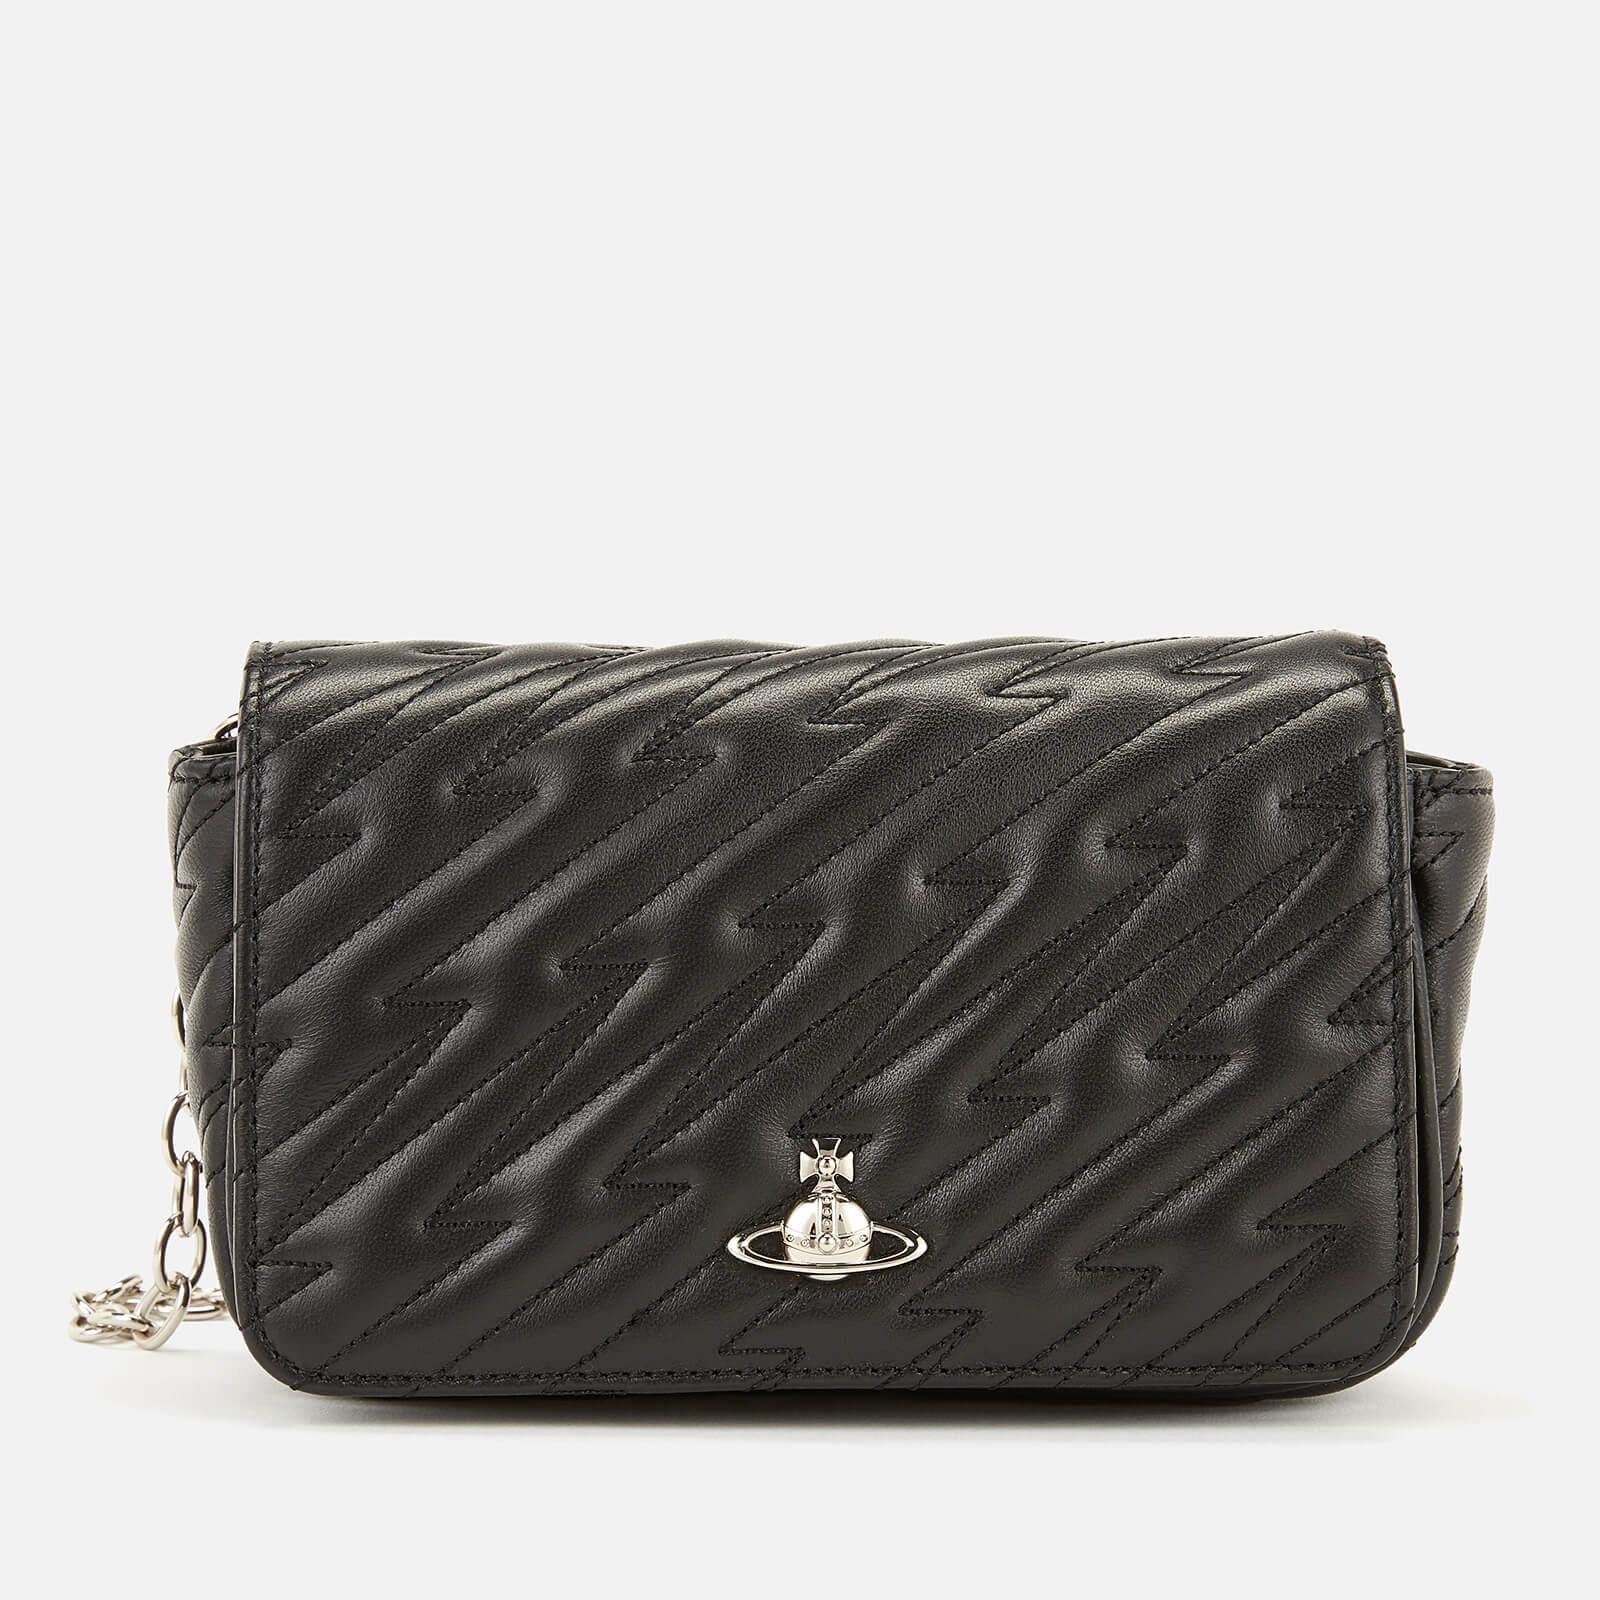 Vivienne Westwood Leather Coventry Mini Cross Body Bag in Black - Lyst